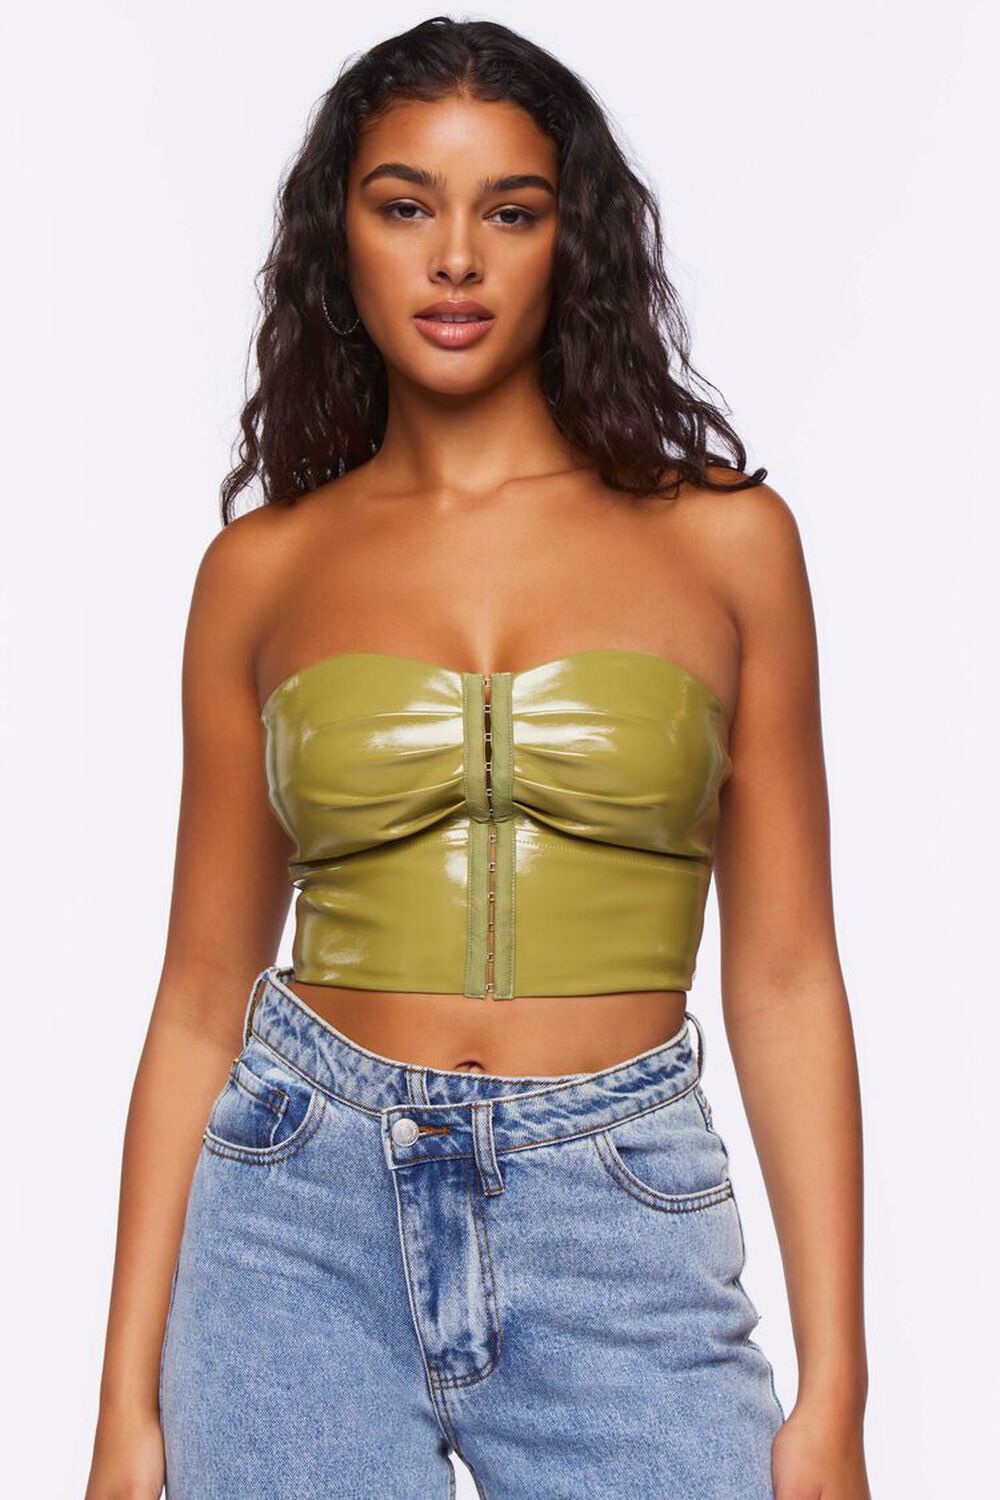 AVOCADO Faux Patent Leather Corset Top, image 1